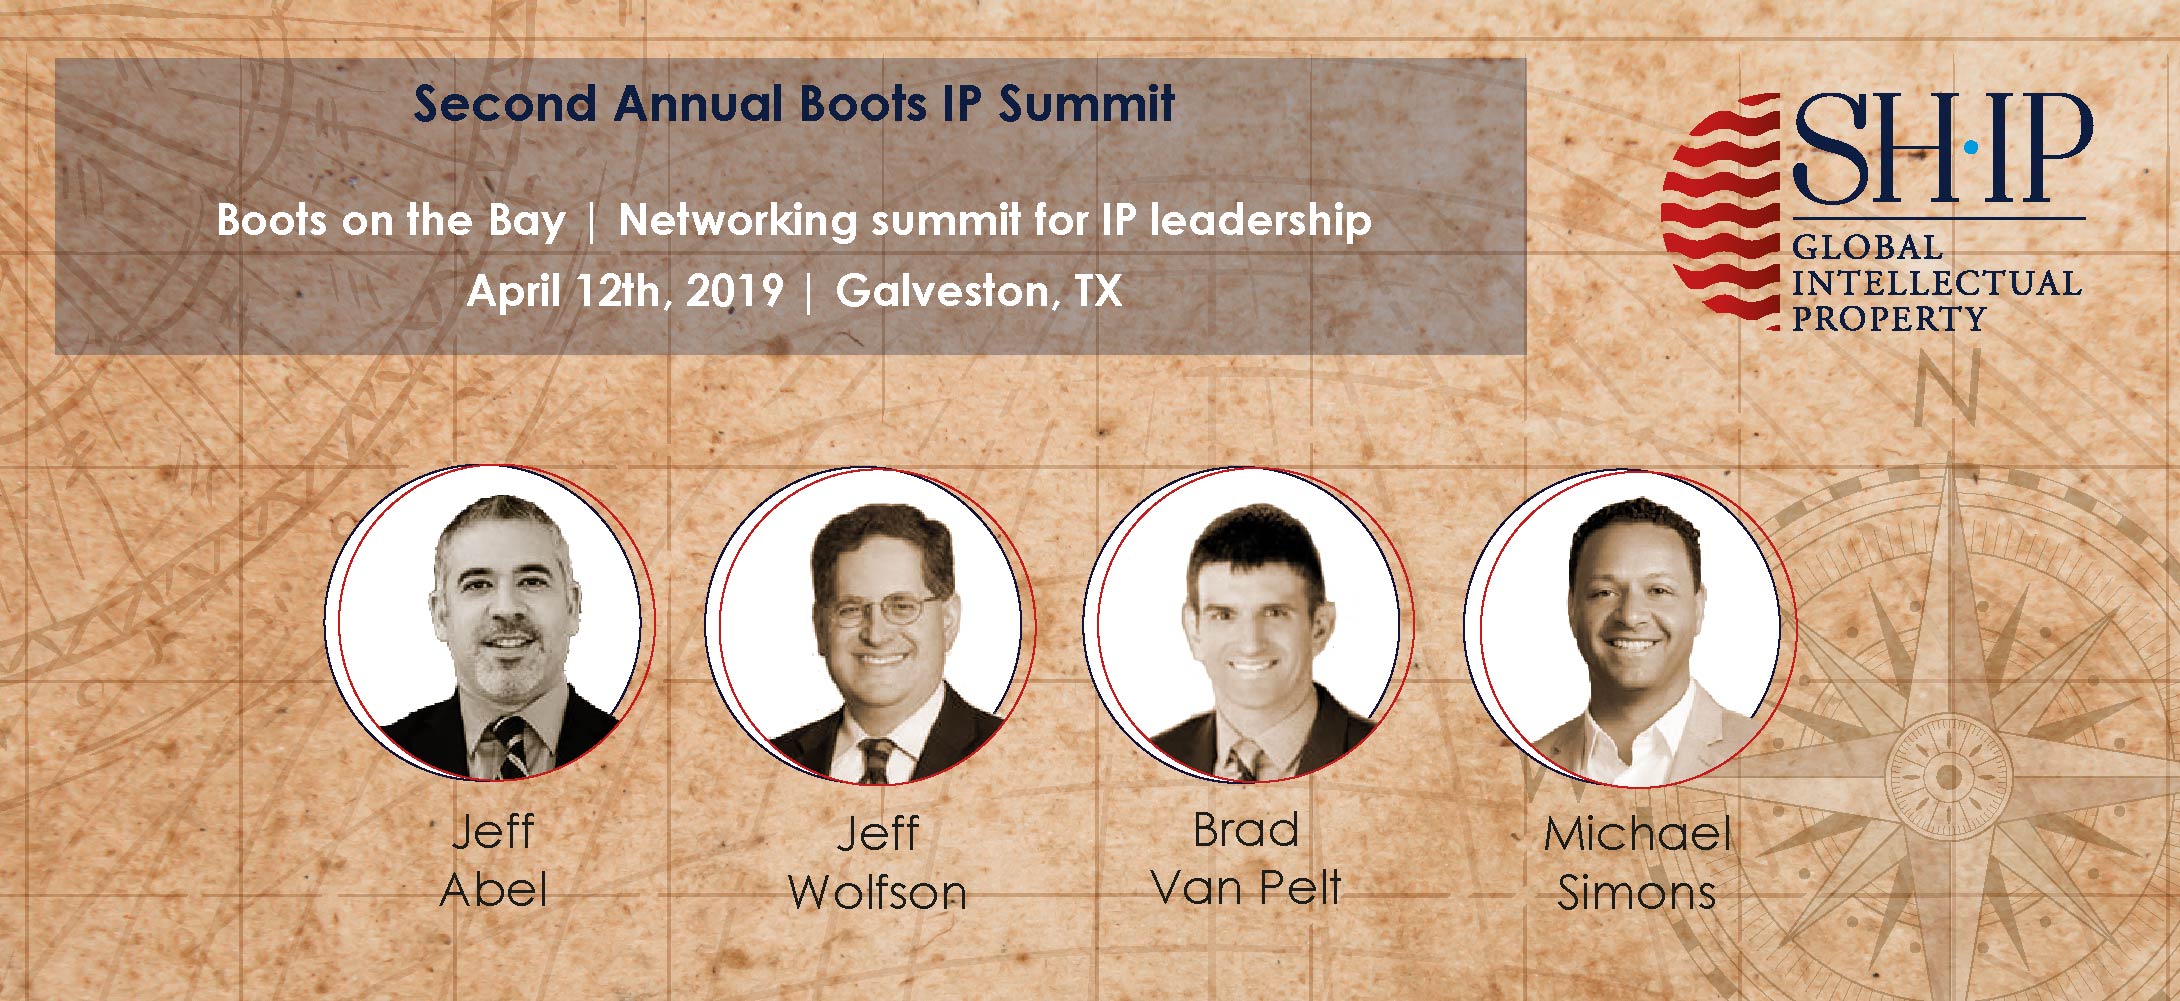 Outside Counsel Panelist at Boots Annual IP Summit announced!